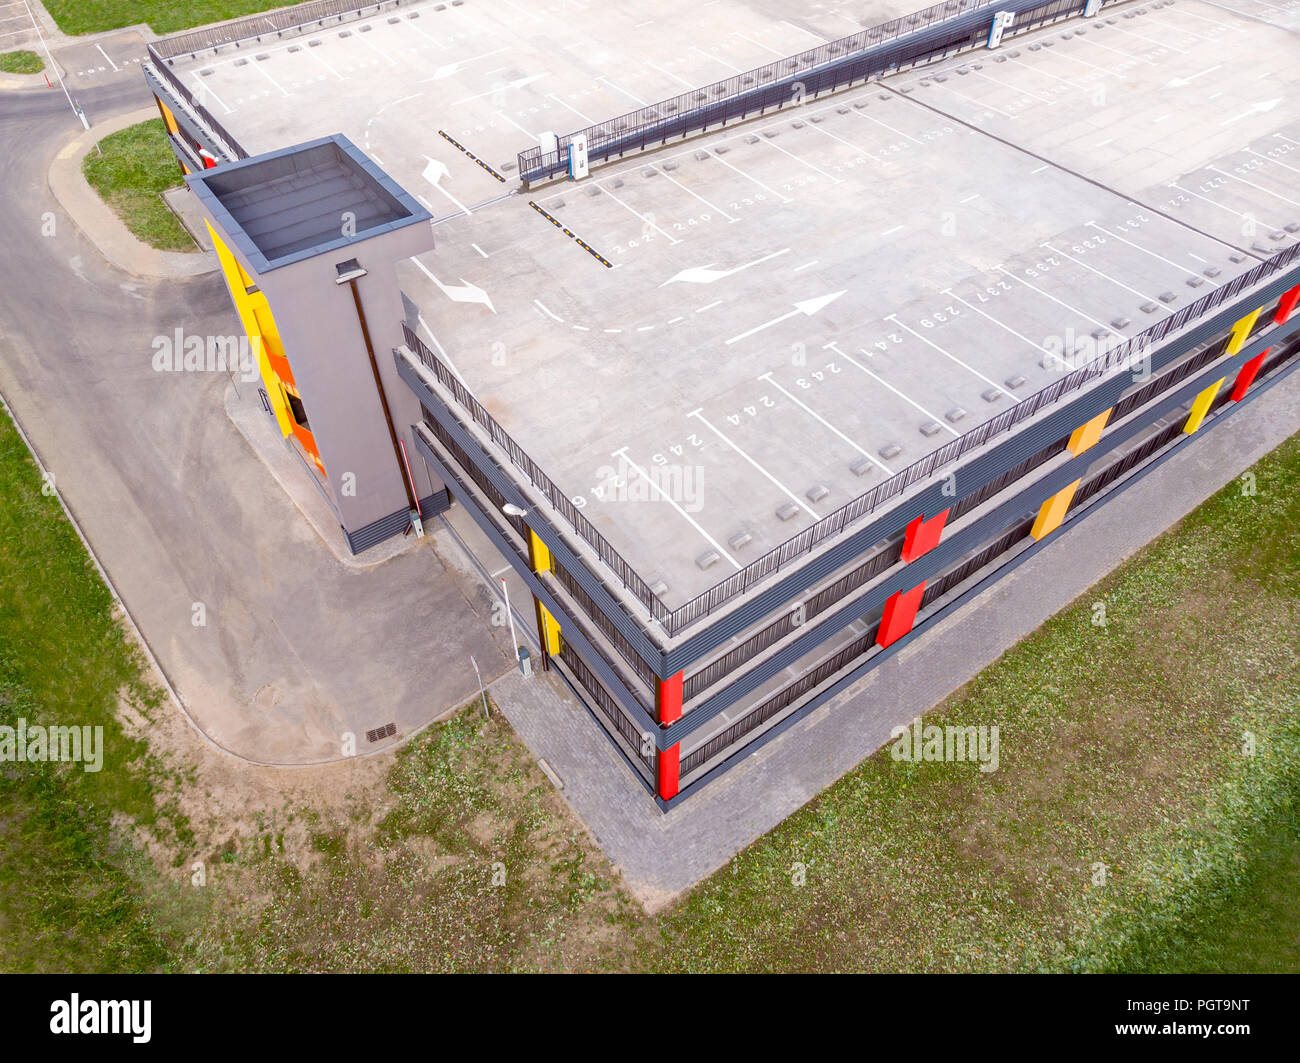 Aerial Top View Of New Parking Garage In City Residential Area Stock Photo Alamy